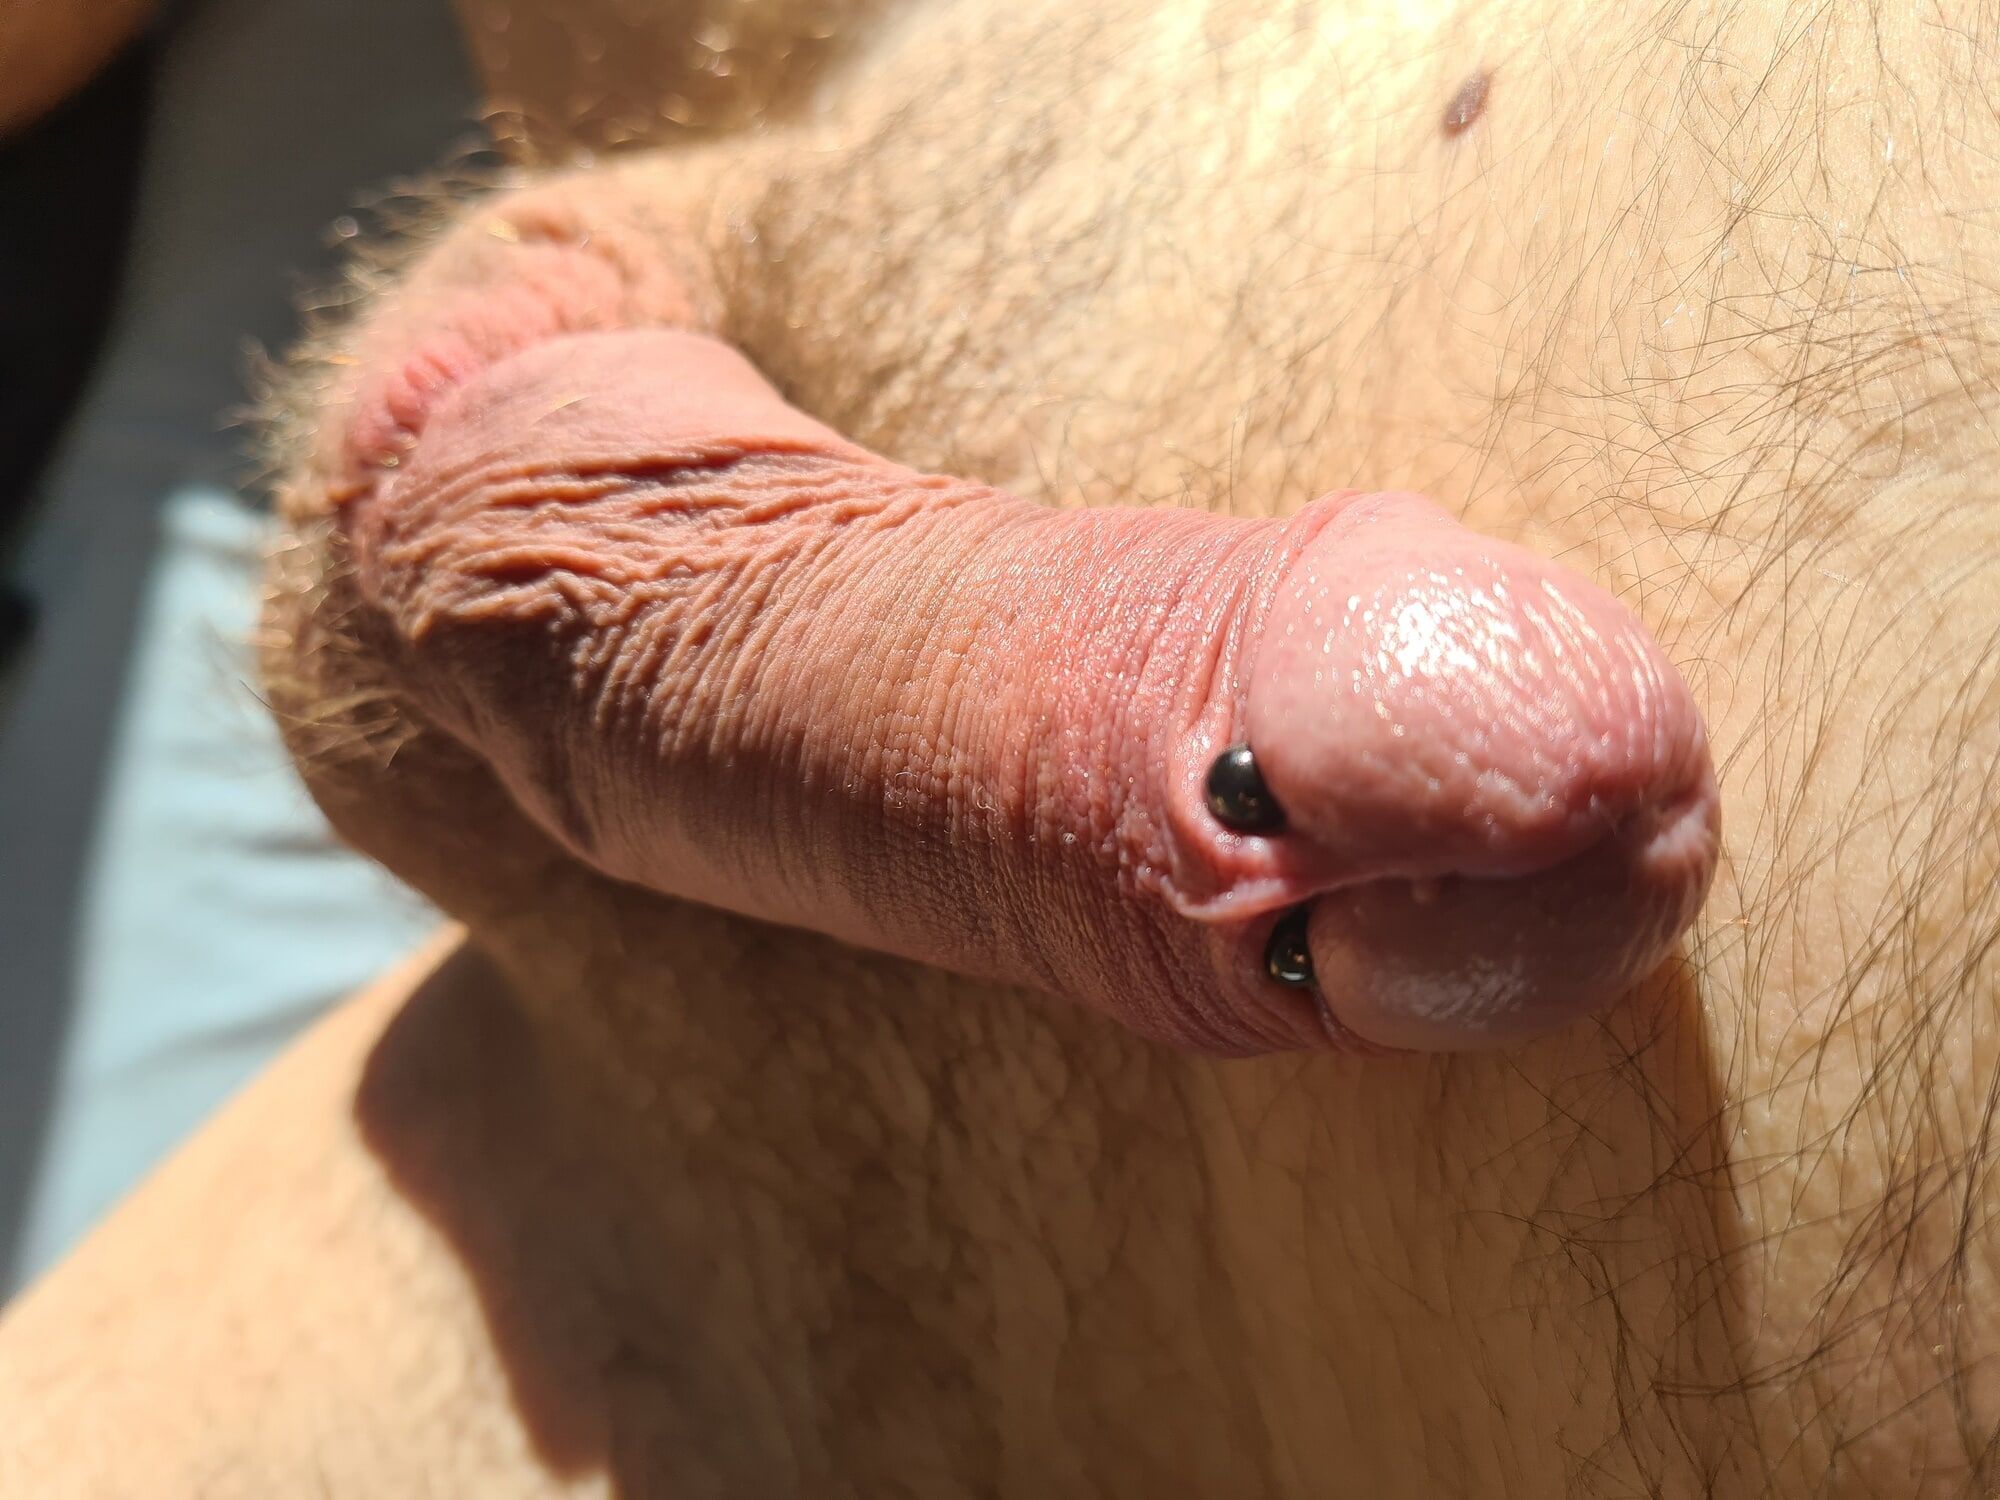 Cock banding session with 5 elastrator bands